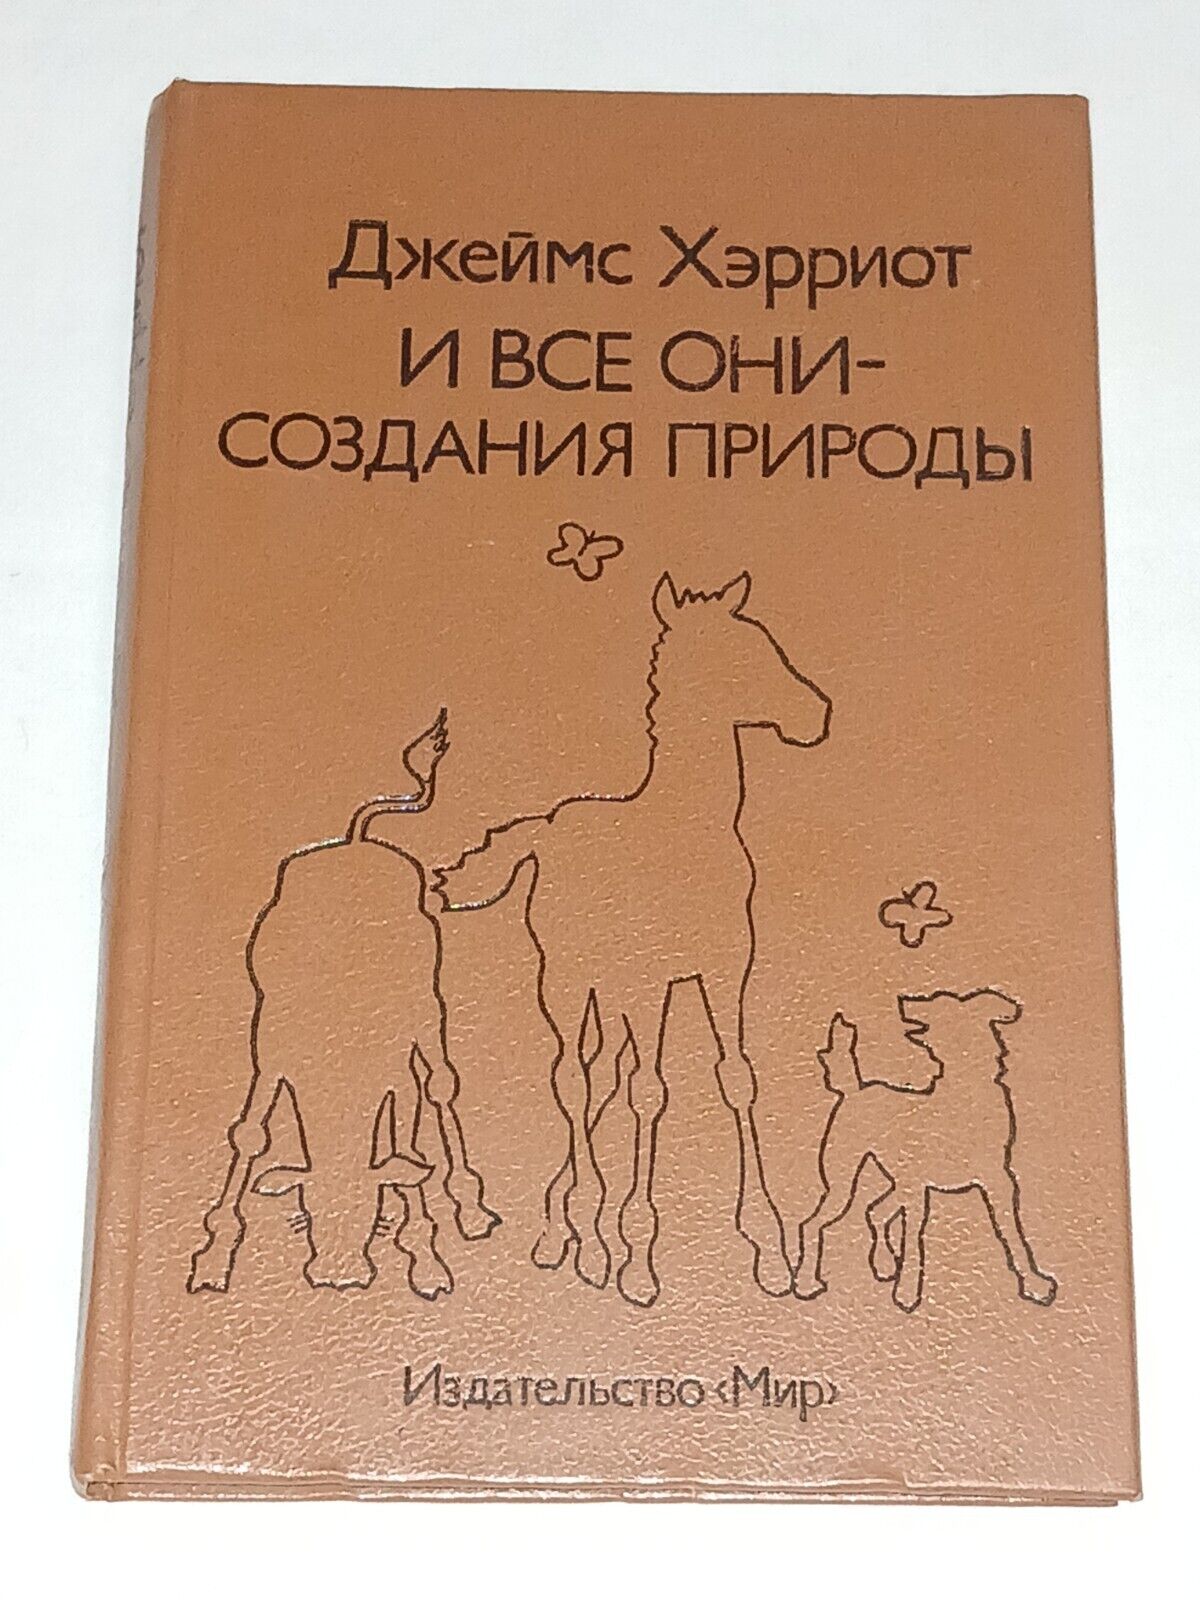 1989 James Herriot - The lord god made them all. Vintage book in Russian